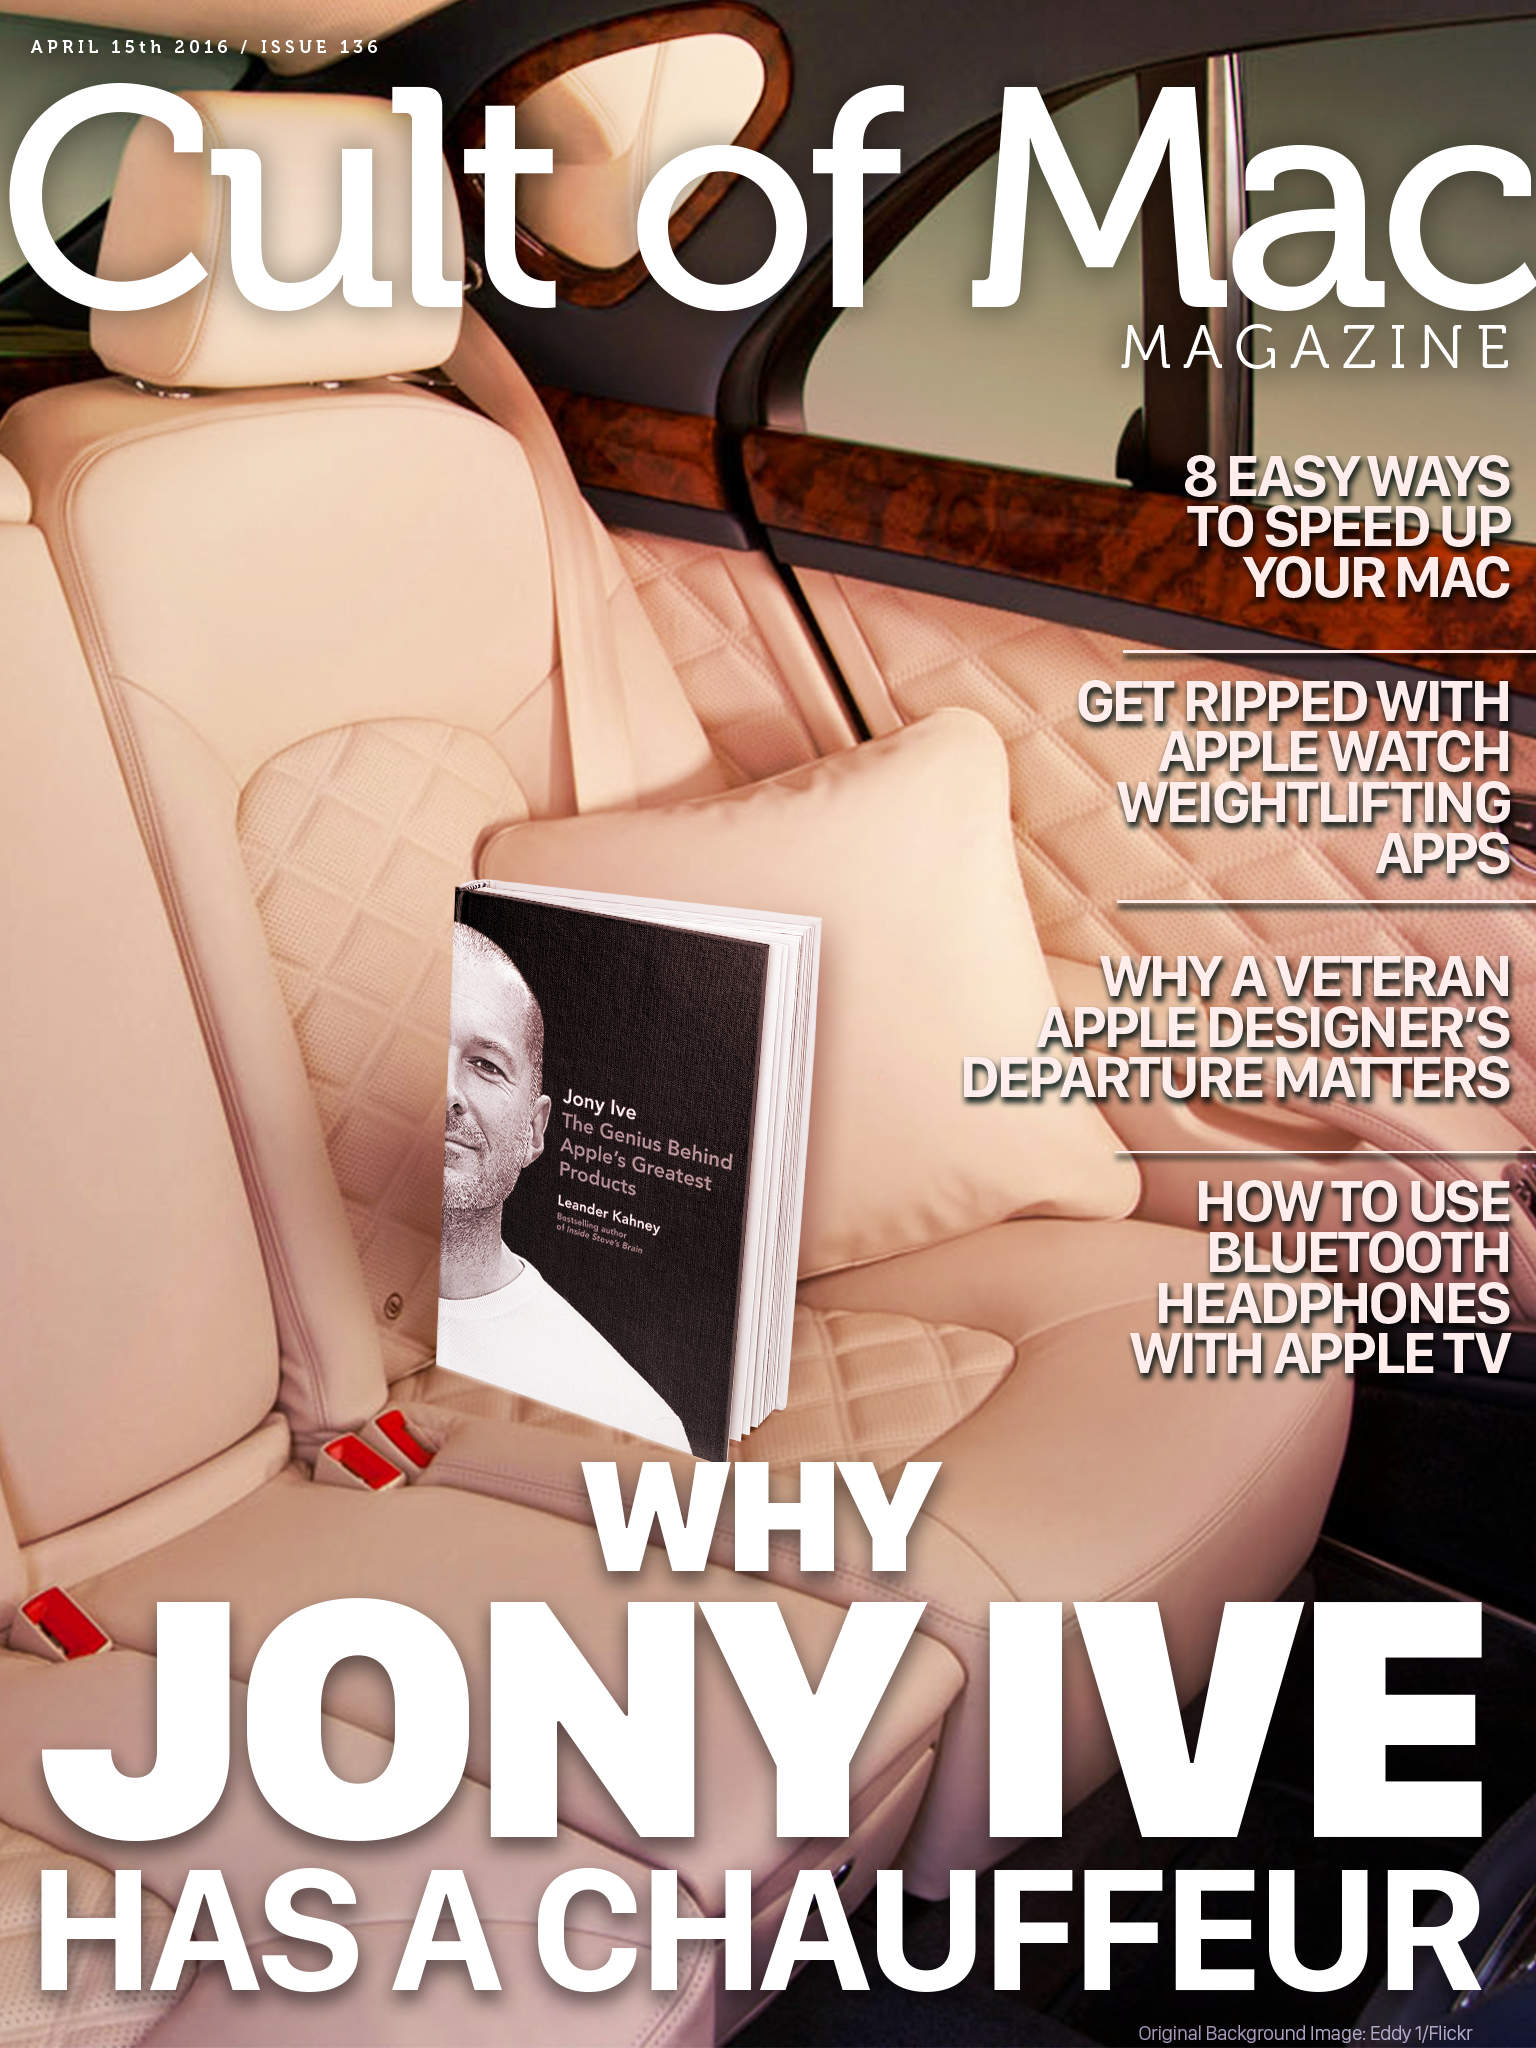 Why does Jony Ive ride around in a Bentley? Cult of Mac will tell you.